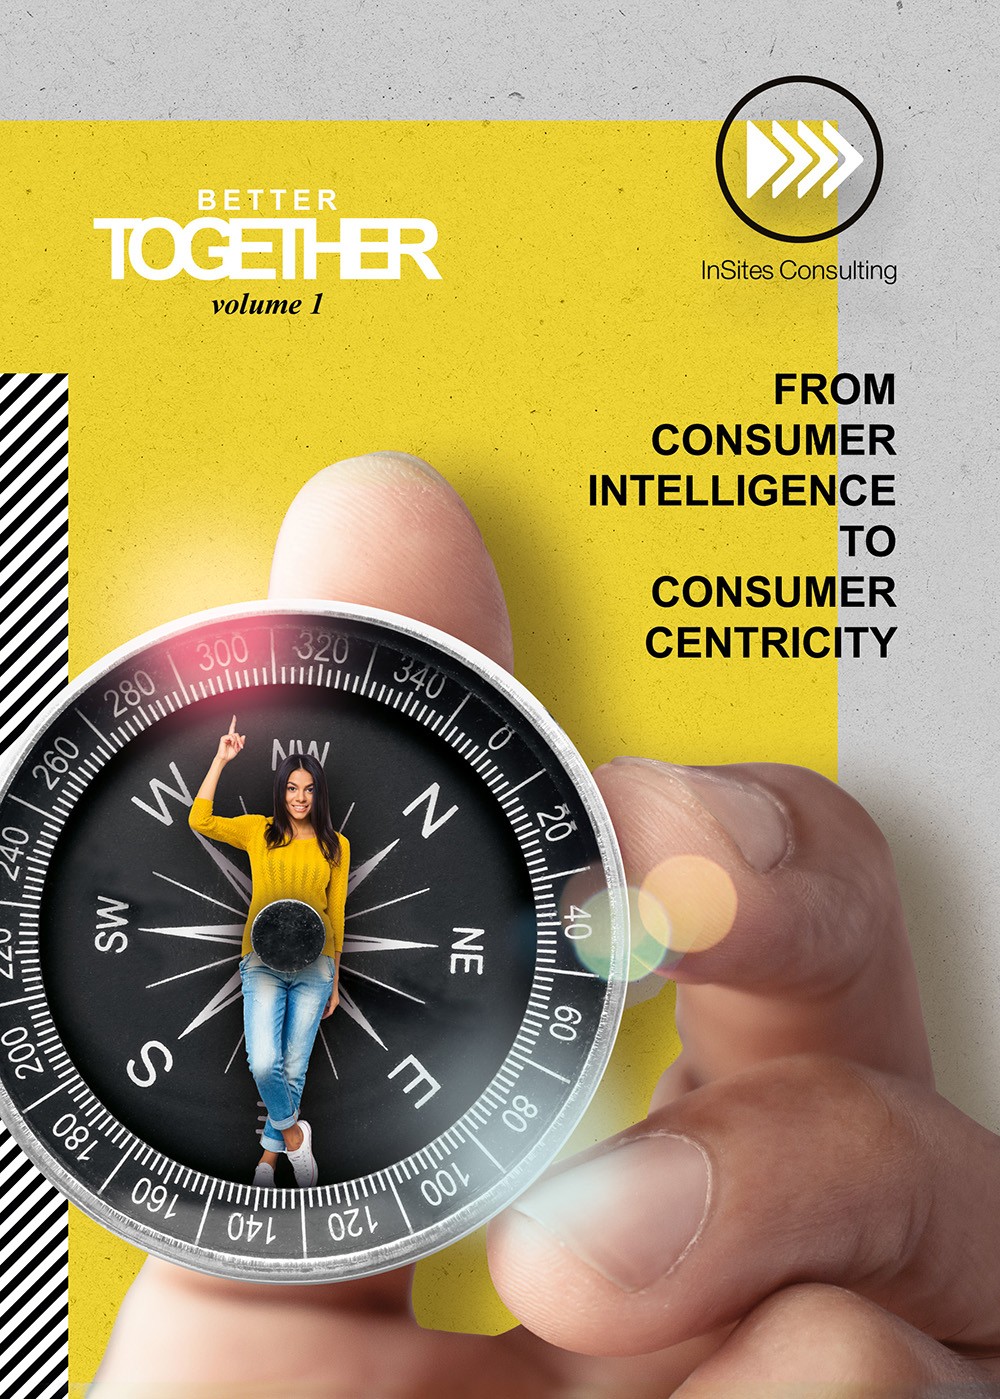 From Consumer Intelligence to Consumer Centricity